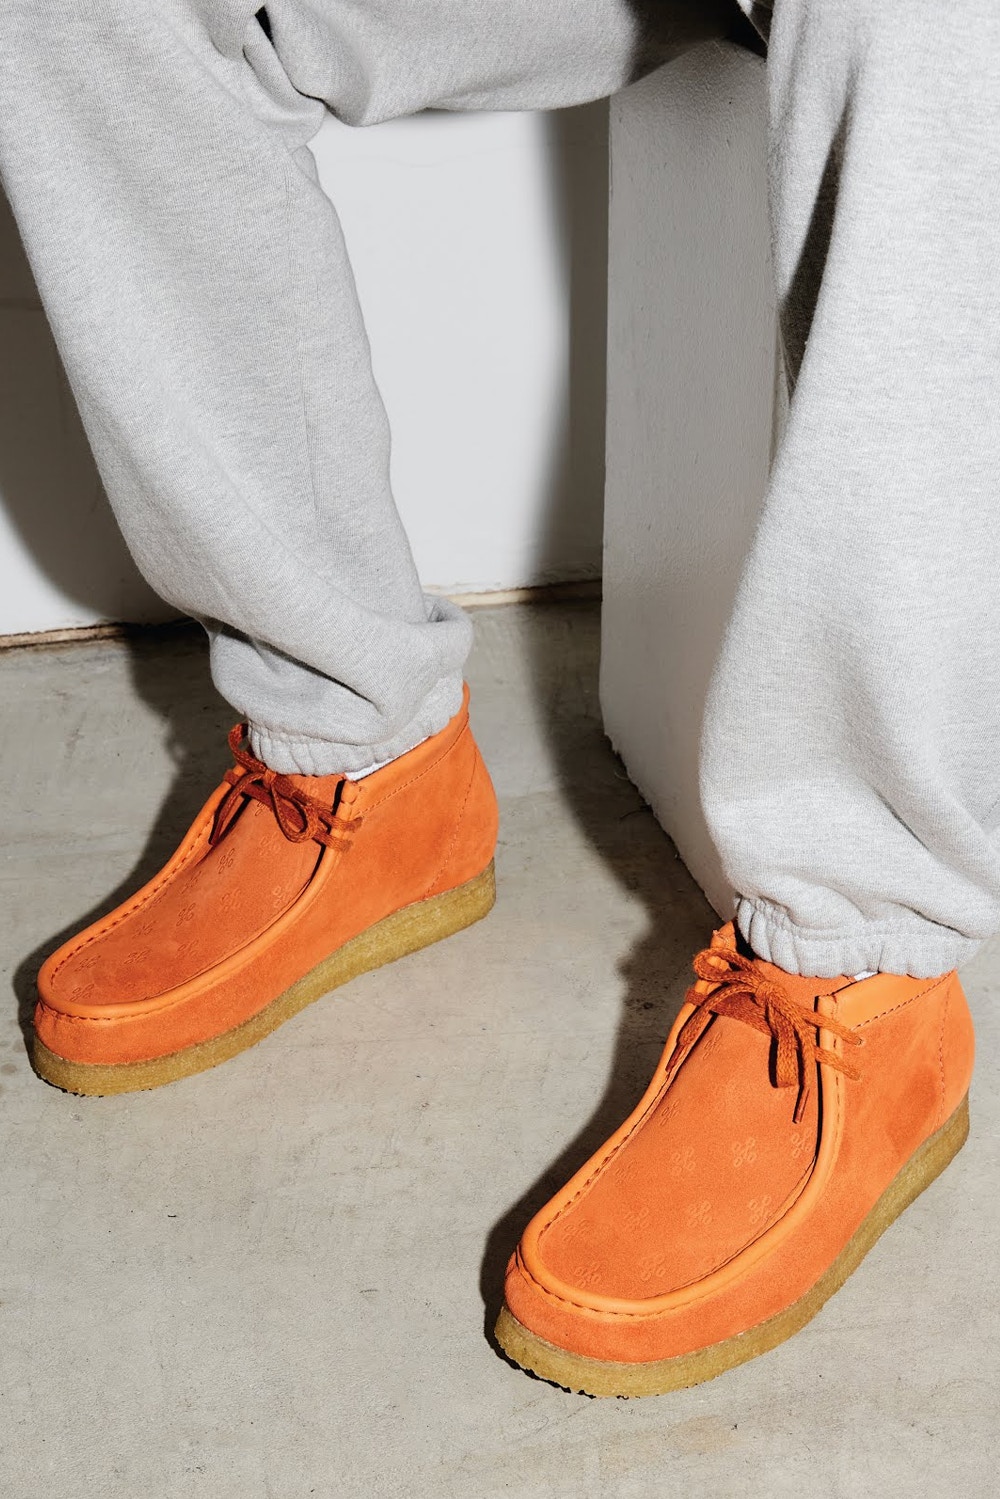 clarks wallabee collaboration